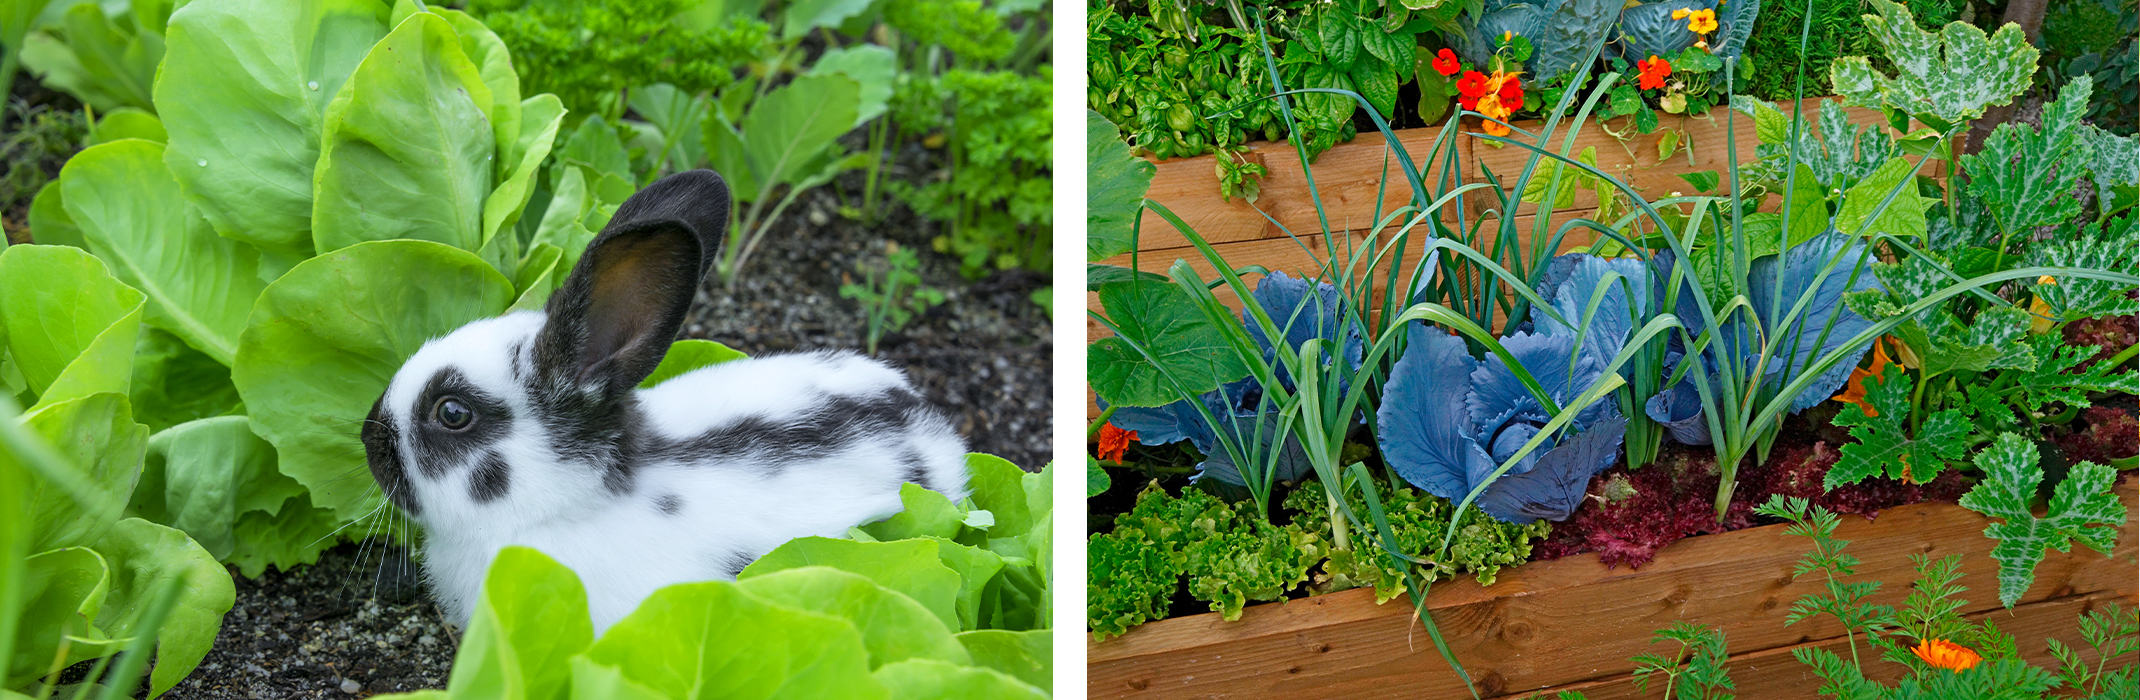 2 images: a rabbit in garden with lettuce and raised vegetable gardens